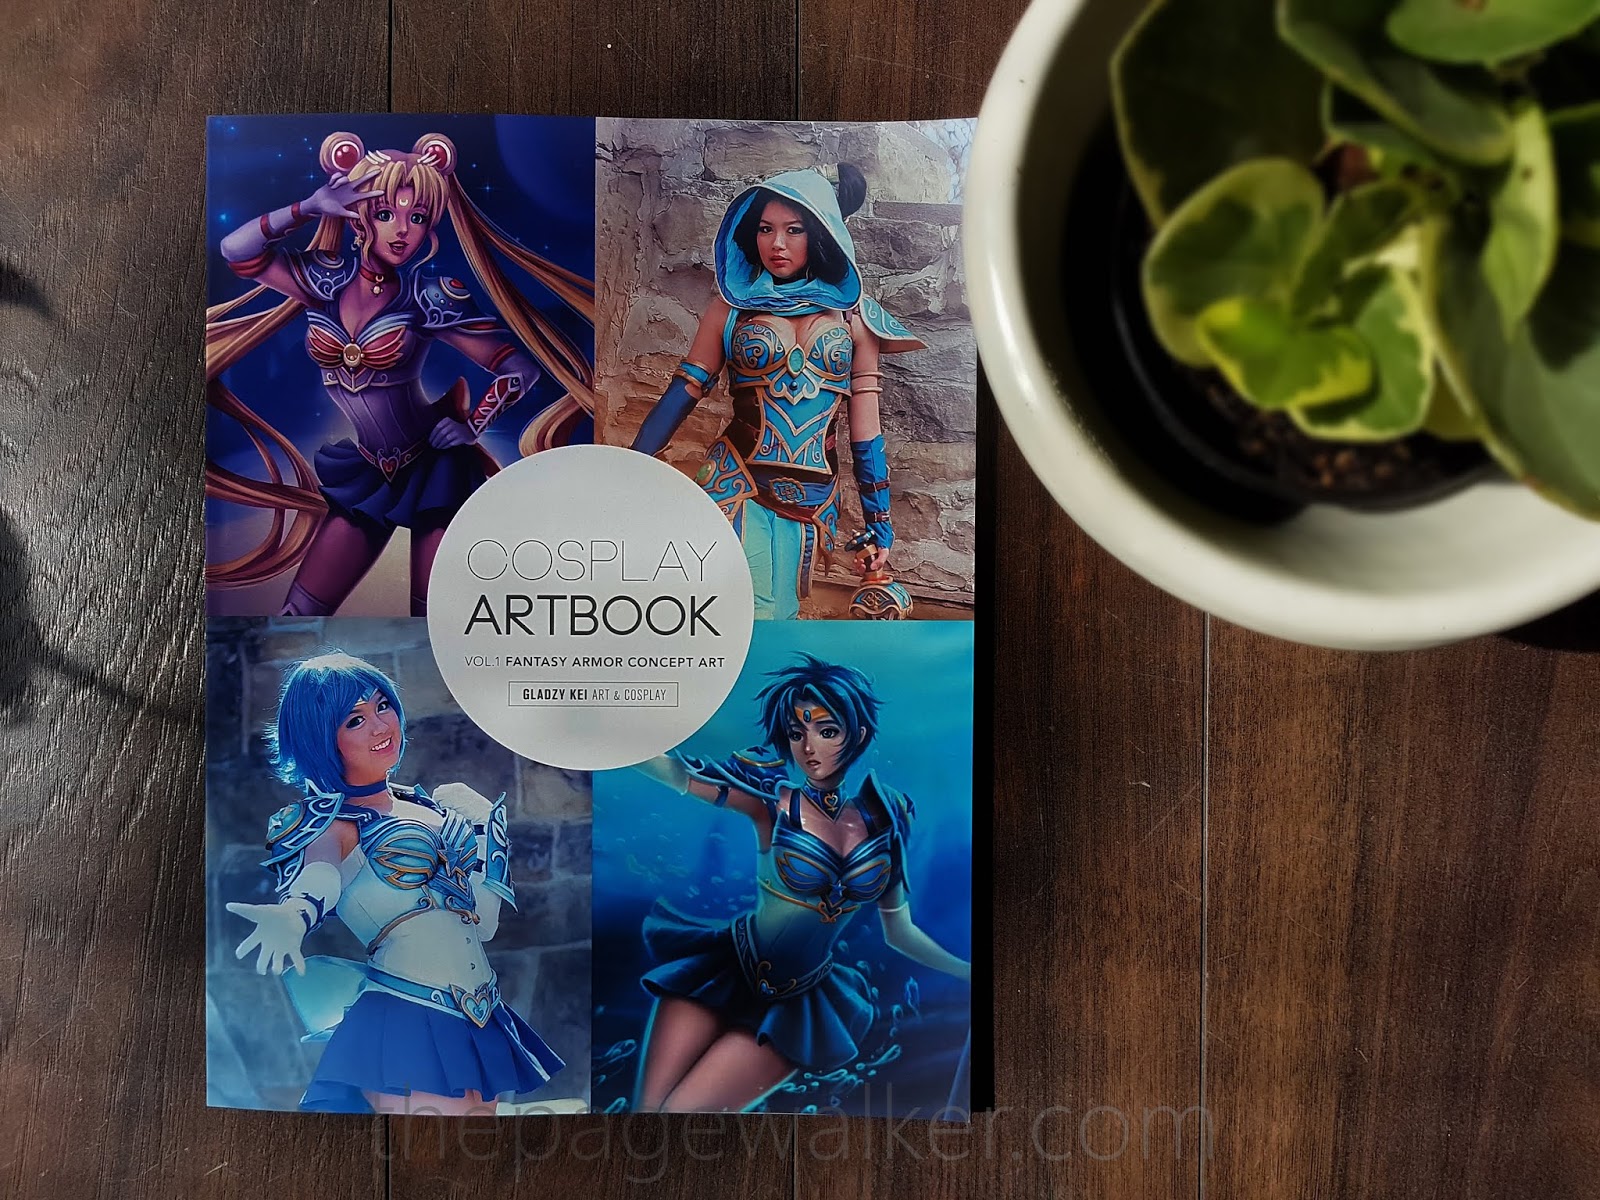 Book Review  COSPLAY ARTBOOK VOL. 1 Fantasy Armor Concept Art by Gladzy  Kei ~ The Page Walker